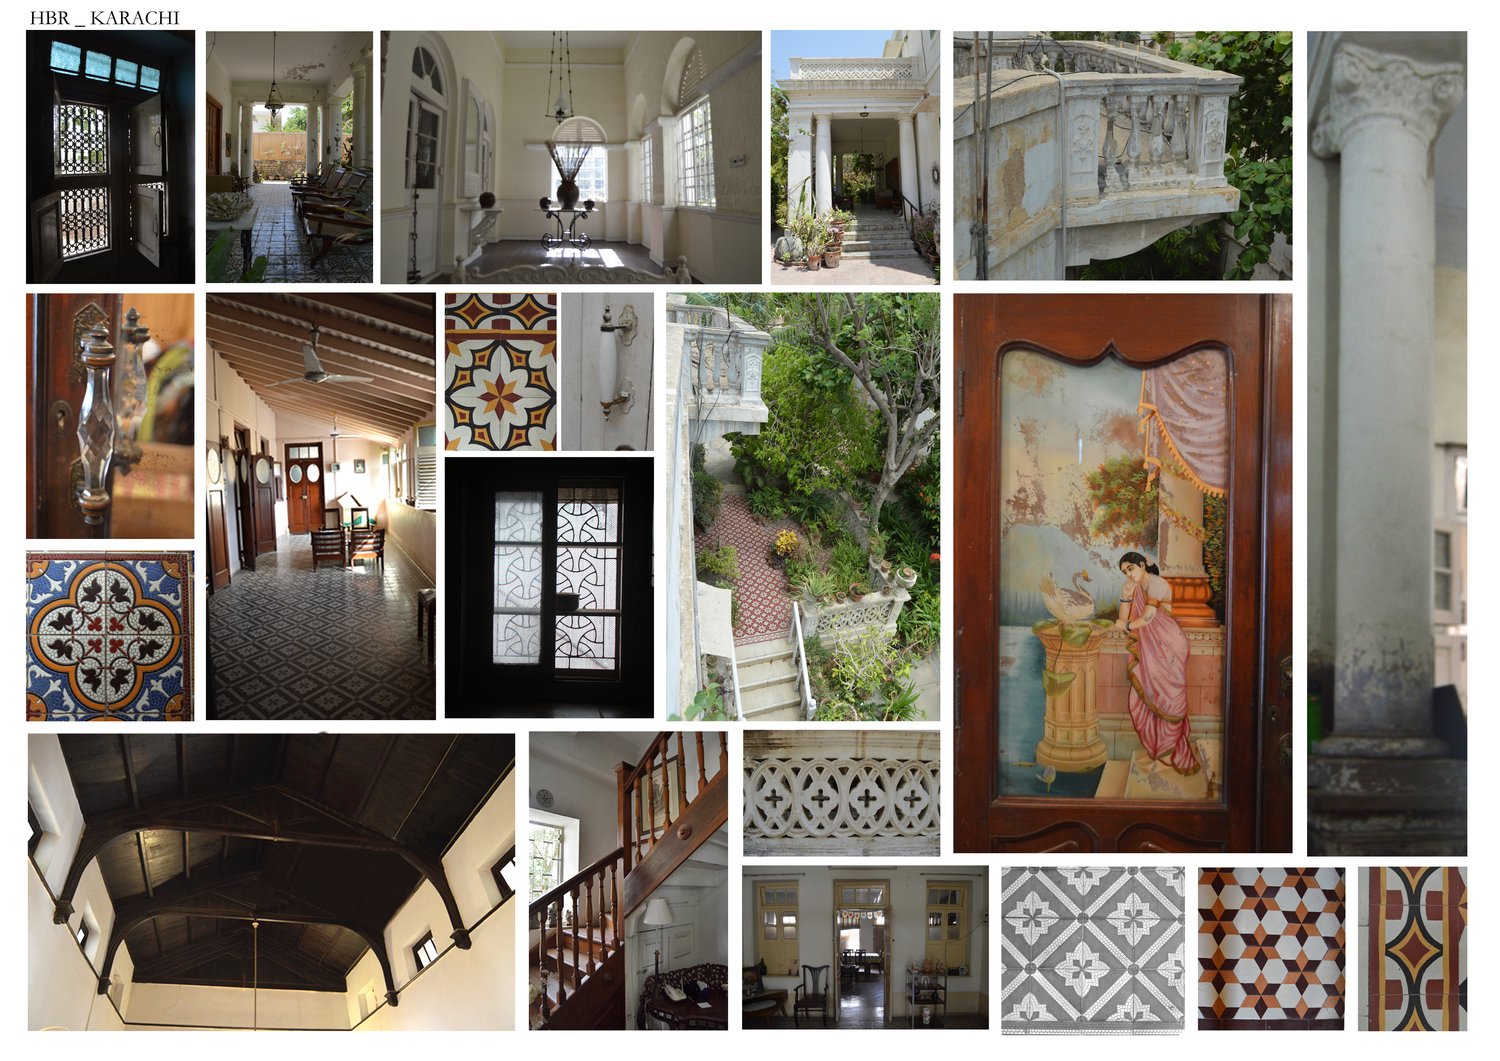  Documentation of Historic Bungalows of pre and post- partition styles, particularly Hindu, Sikh, Colonial and Art Deco. In Karachi bungalows located in the areas of Sohrab Kathrik Parsi Colony, Sirai Quarters, Old Town Quarters, Preedy Quarters, Gar